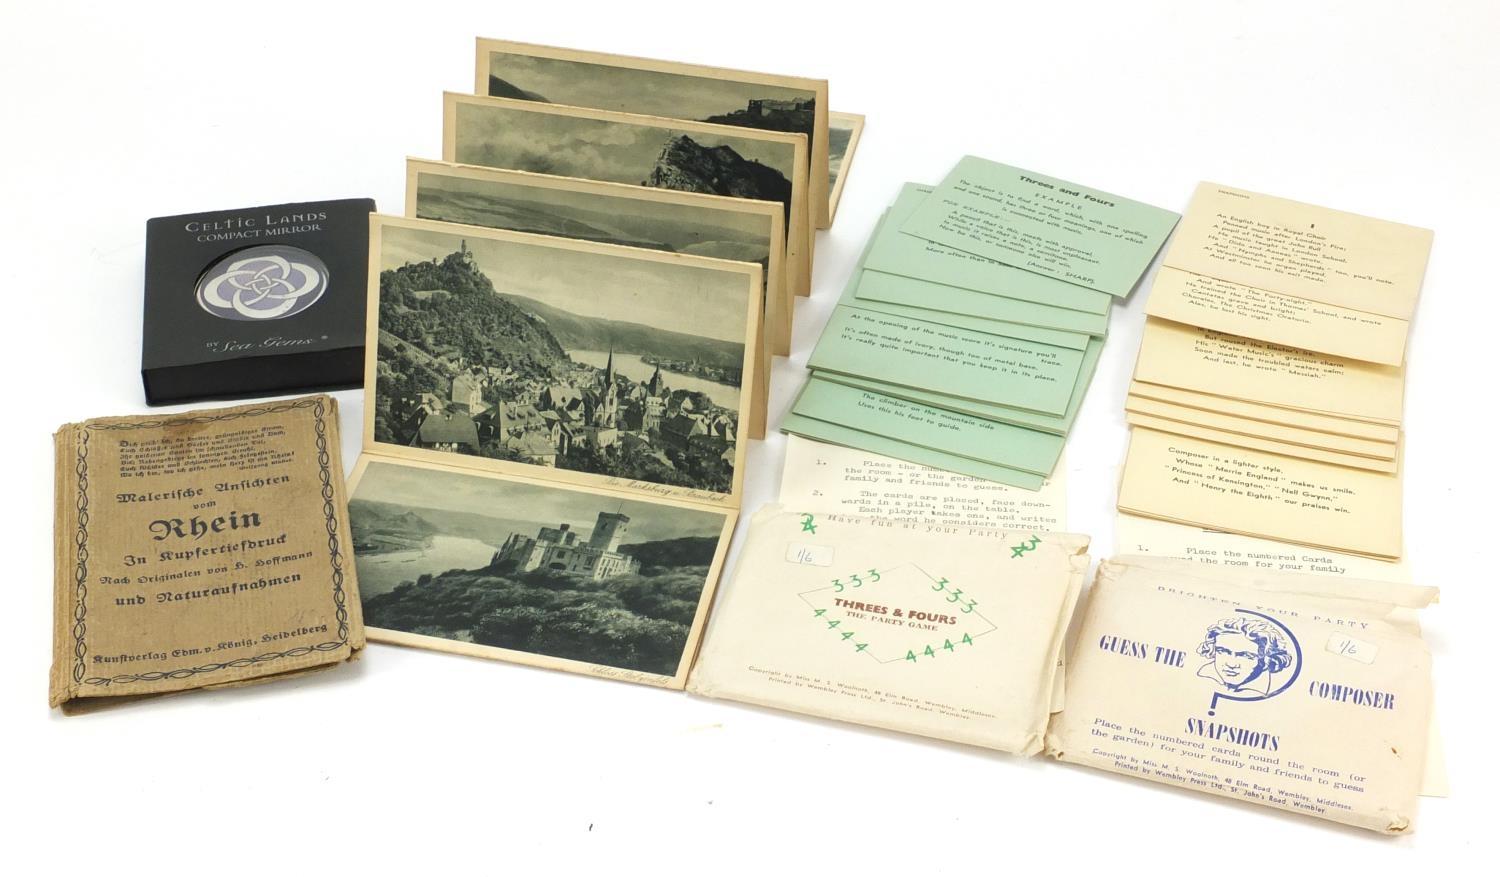 German book fold-out book of postcards and two vintage card games comprising Threes and Fours and